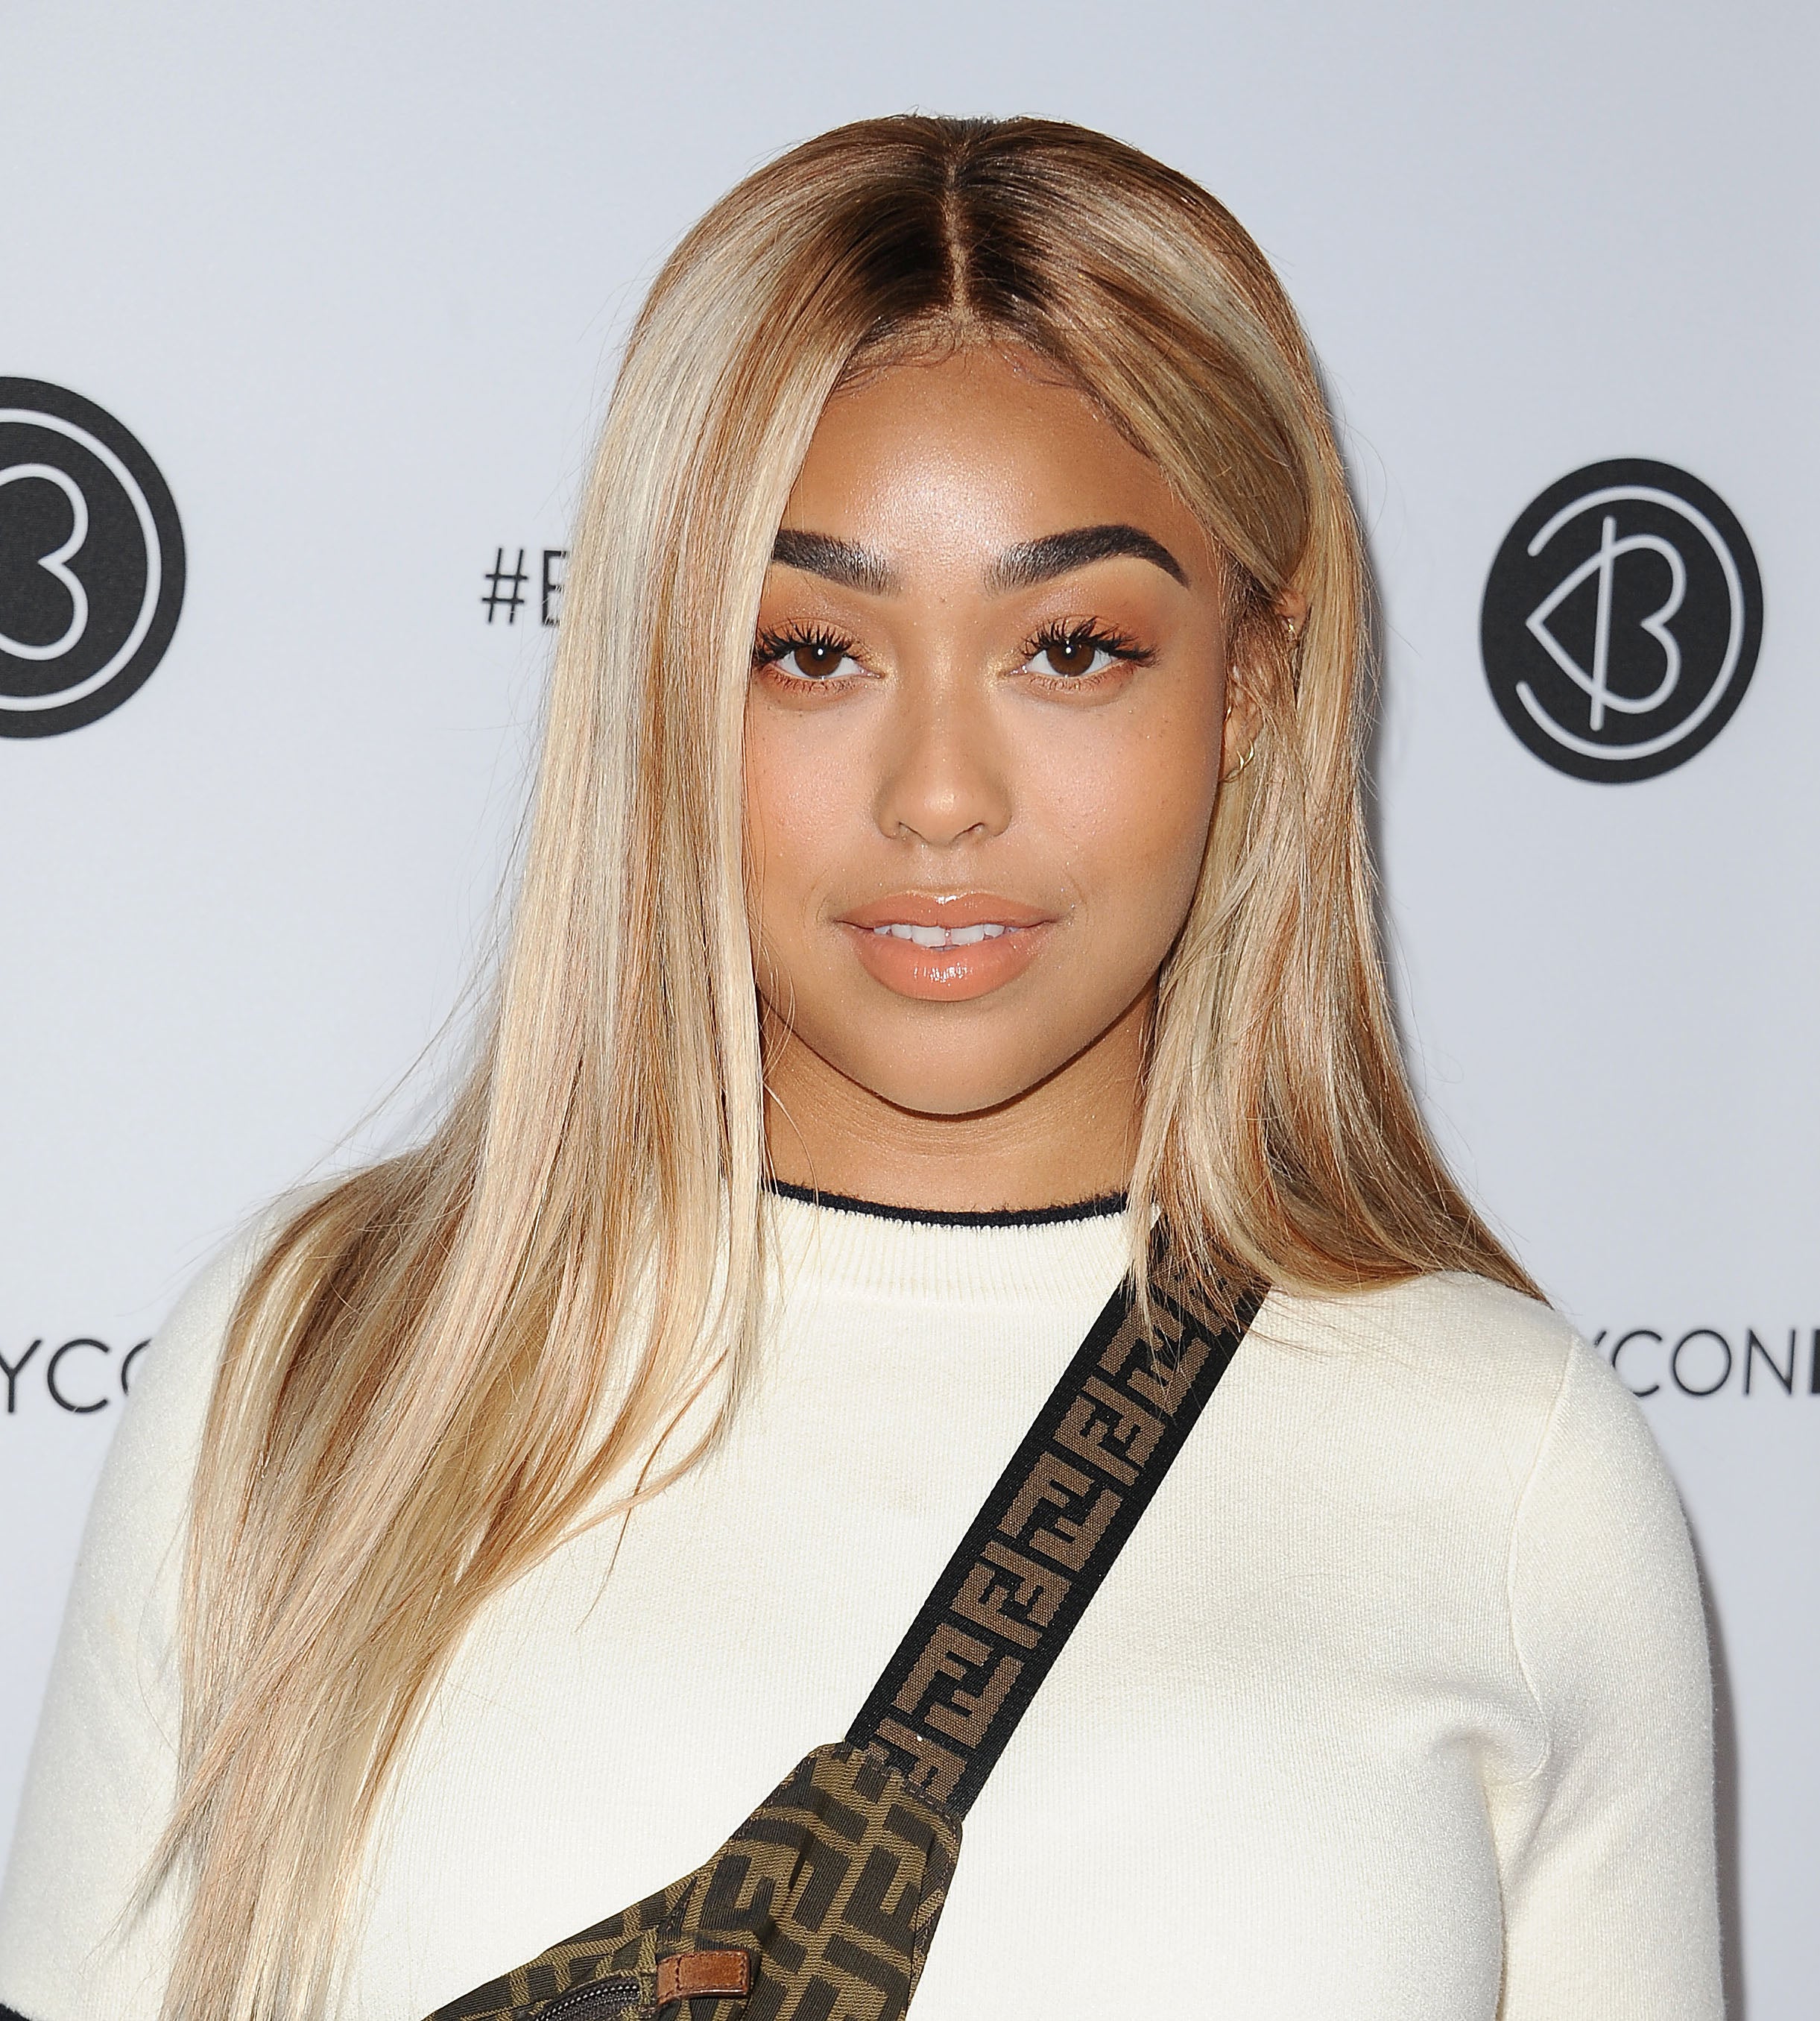 ICYMI, All of Your Favorite Celebs Were At Beautycon This Weekend
